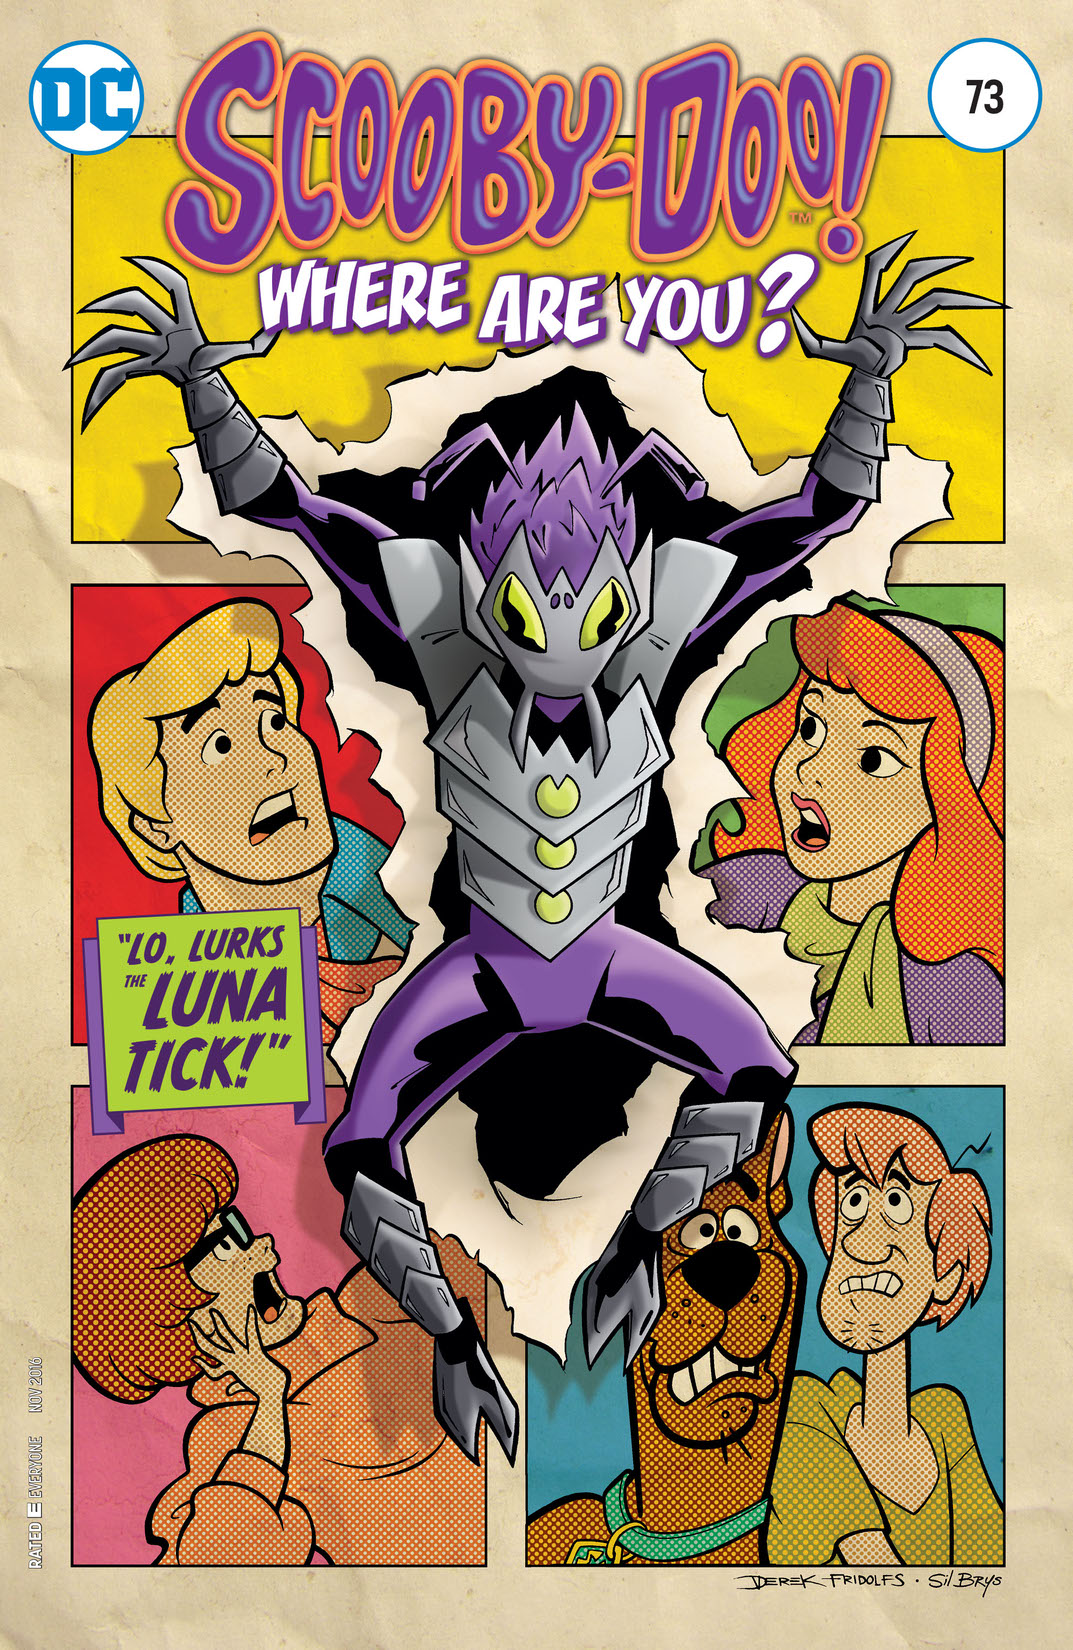 Scooby-Doo, Where Are You? #73 preview images